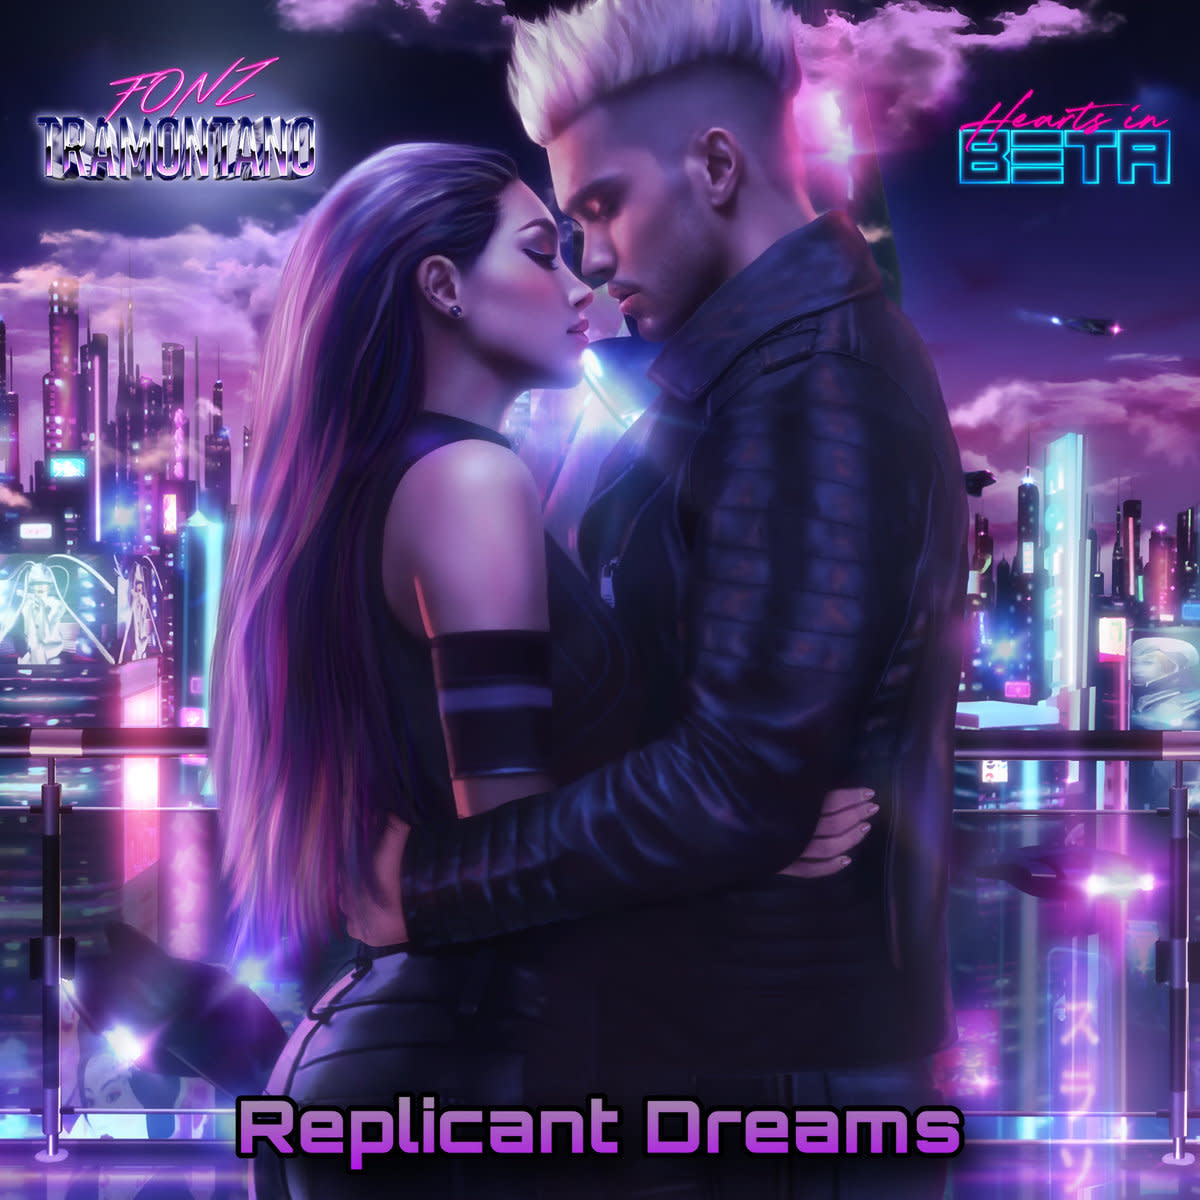 Synth Single Review: “Replicant Dreams